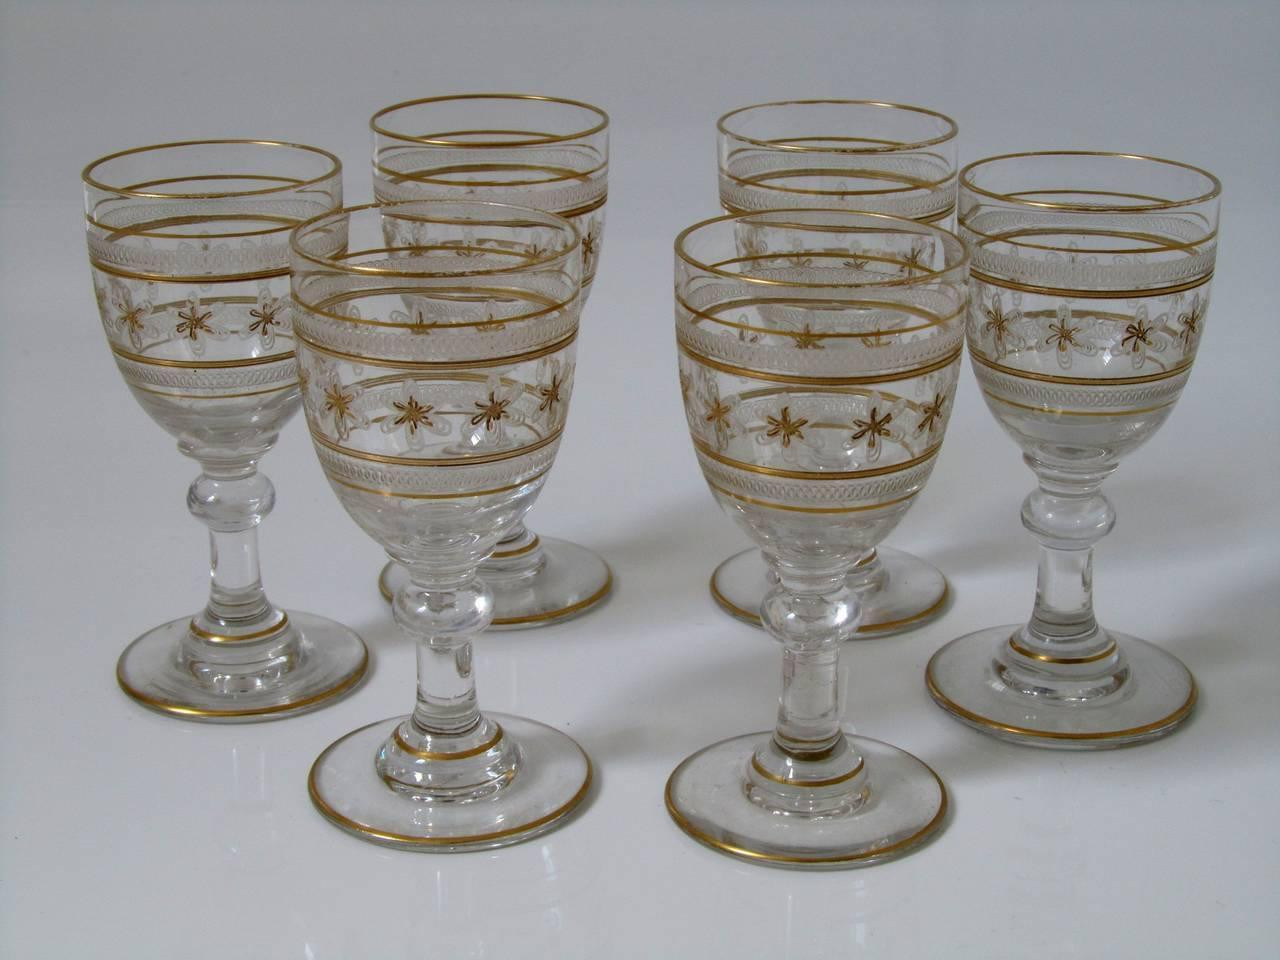 29 Cute Waterford Vase Patterns 2024 free download waterford vase patterns of saint louis antique french crystal gilded liquor or aperitif serving inside saint louis antique french crystal gilded liquor or aperitif serving set at 1stdibs